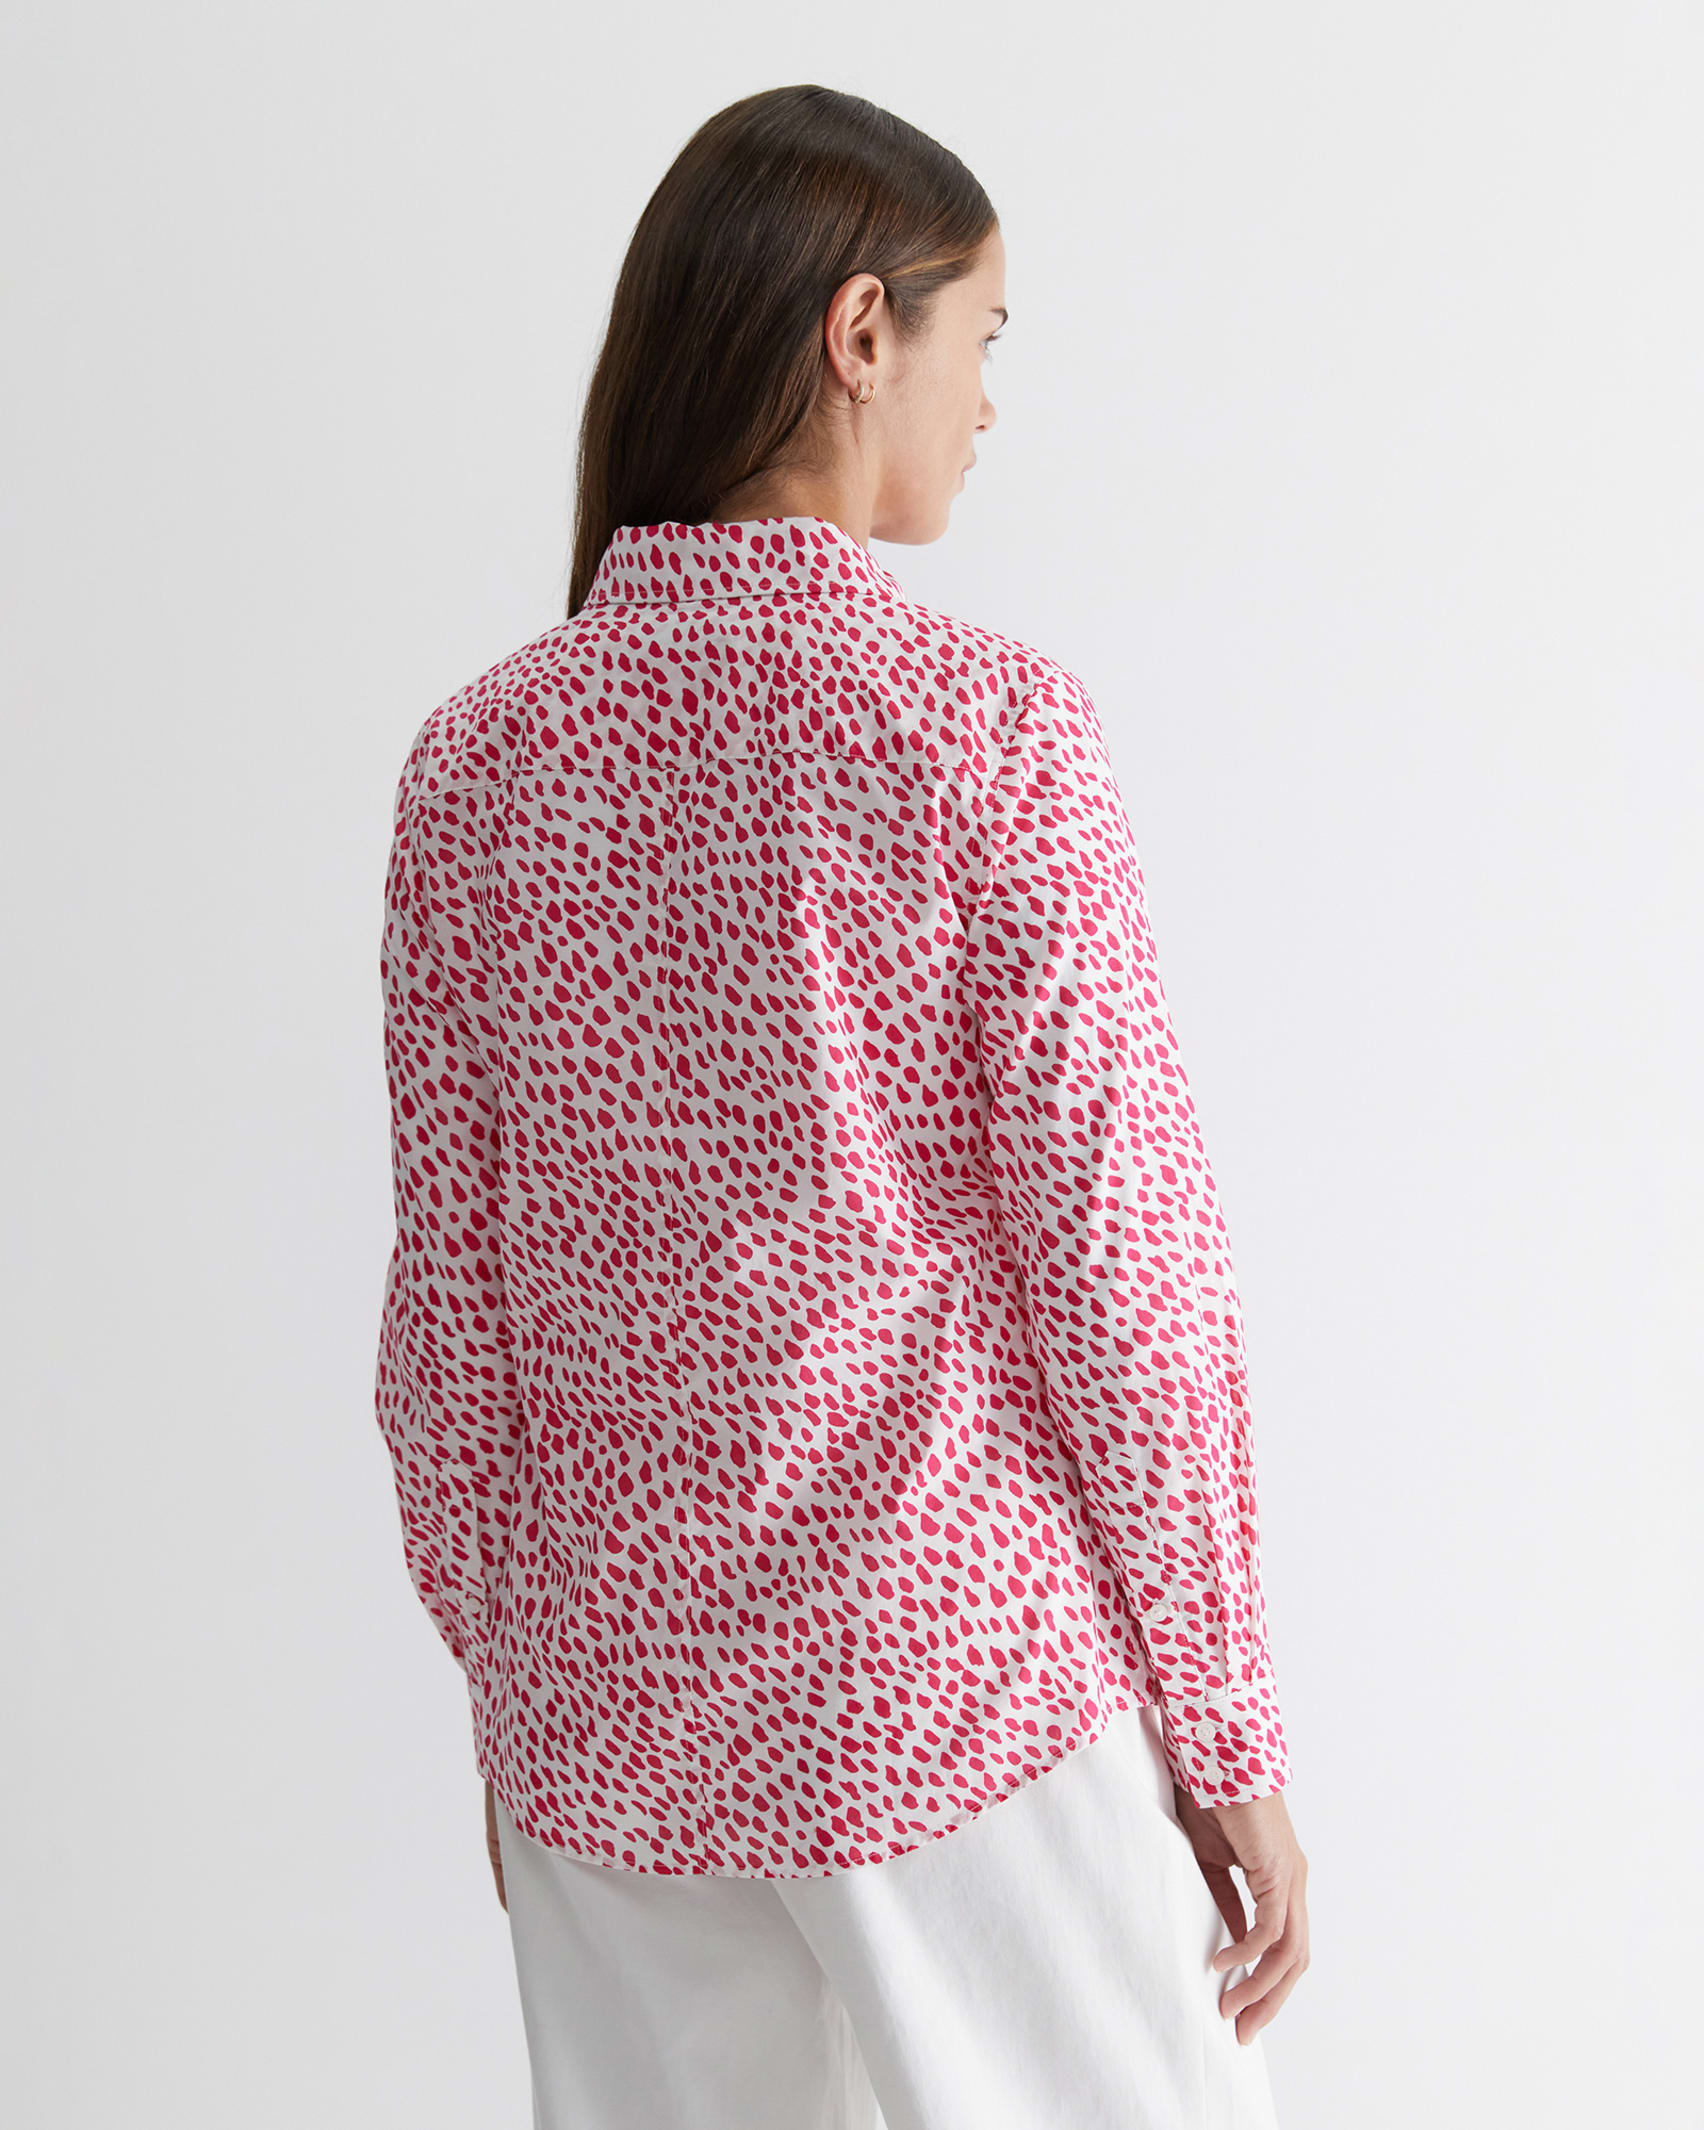 Dashed Lily Voile Shirt in WHITE/PINK